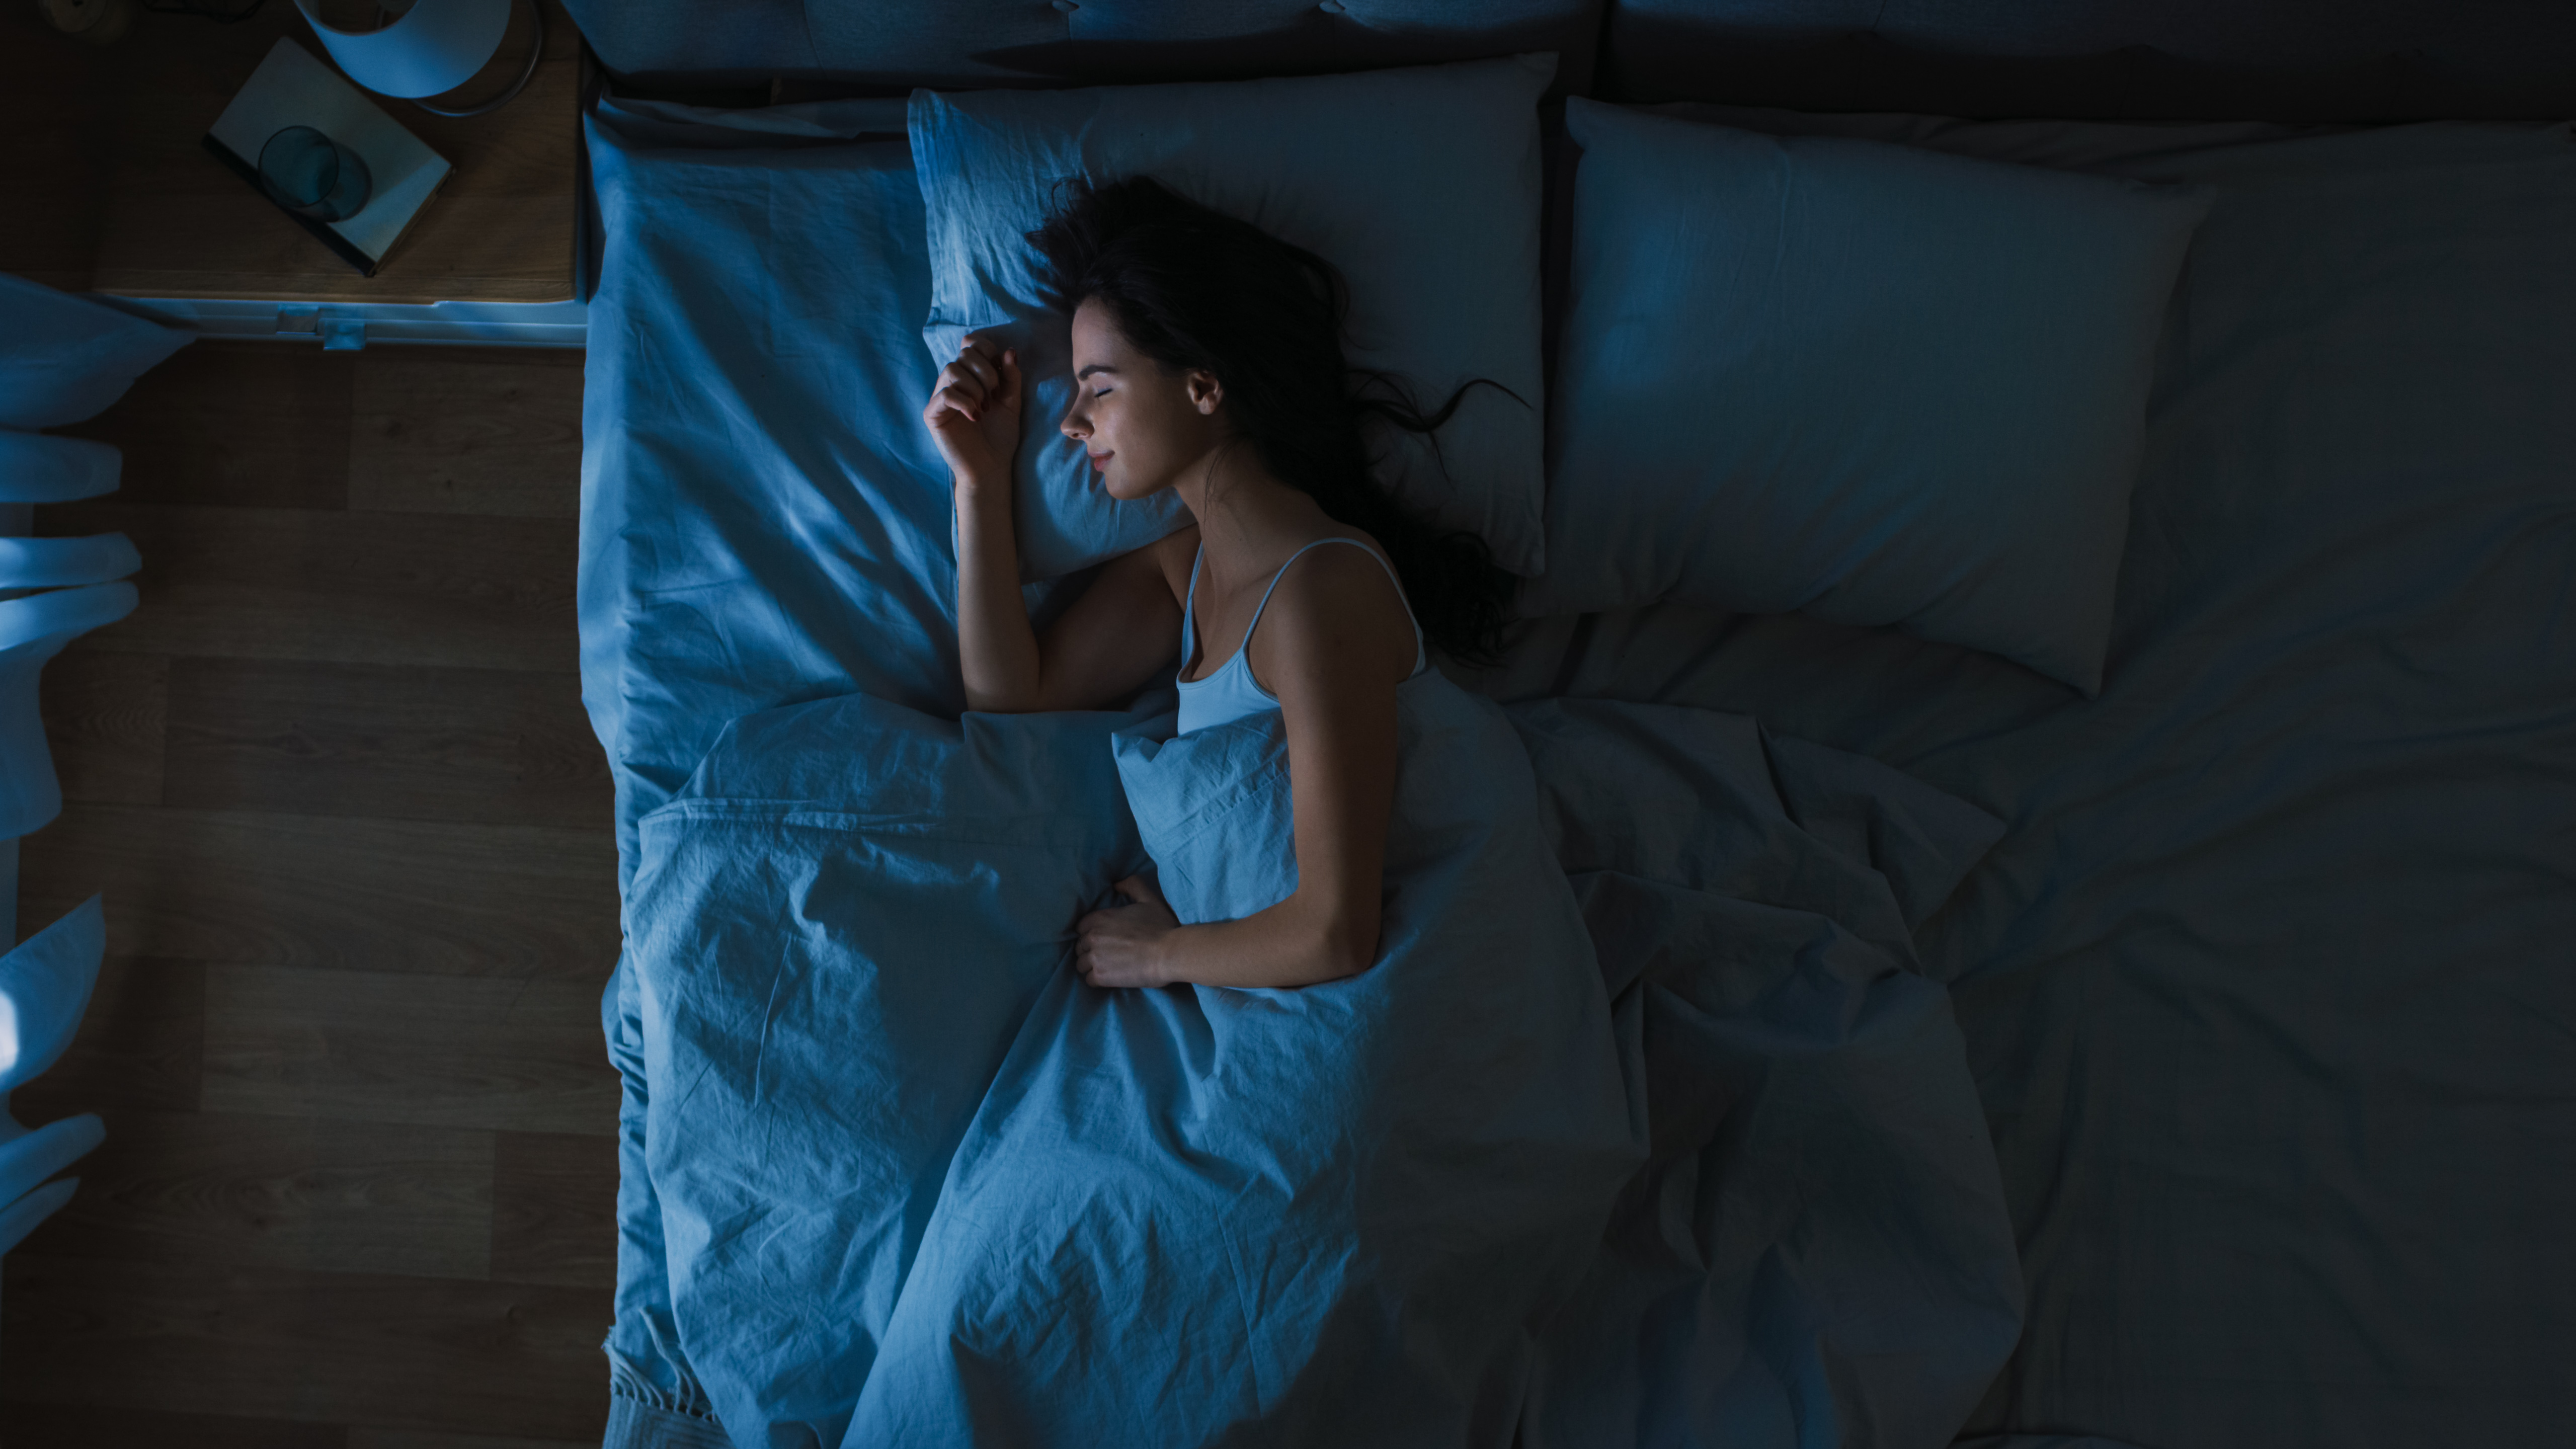 THE UNEXPECTED IMPACT OF SUGAR ON SLEEP